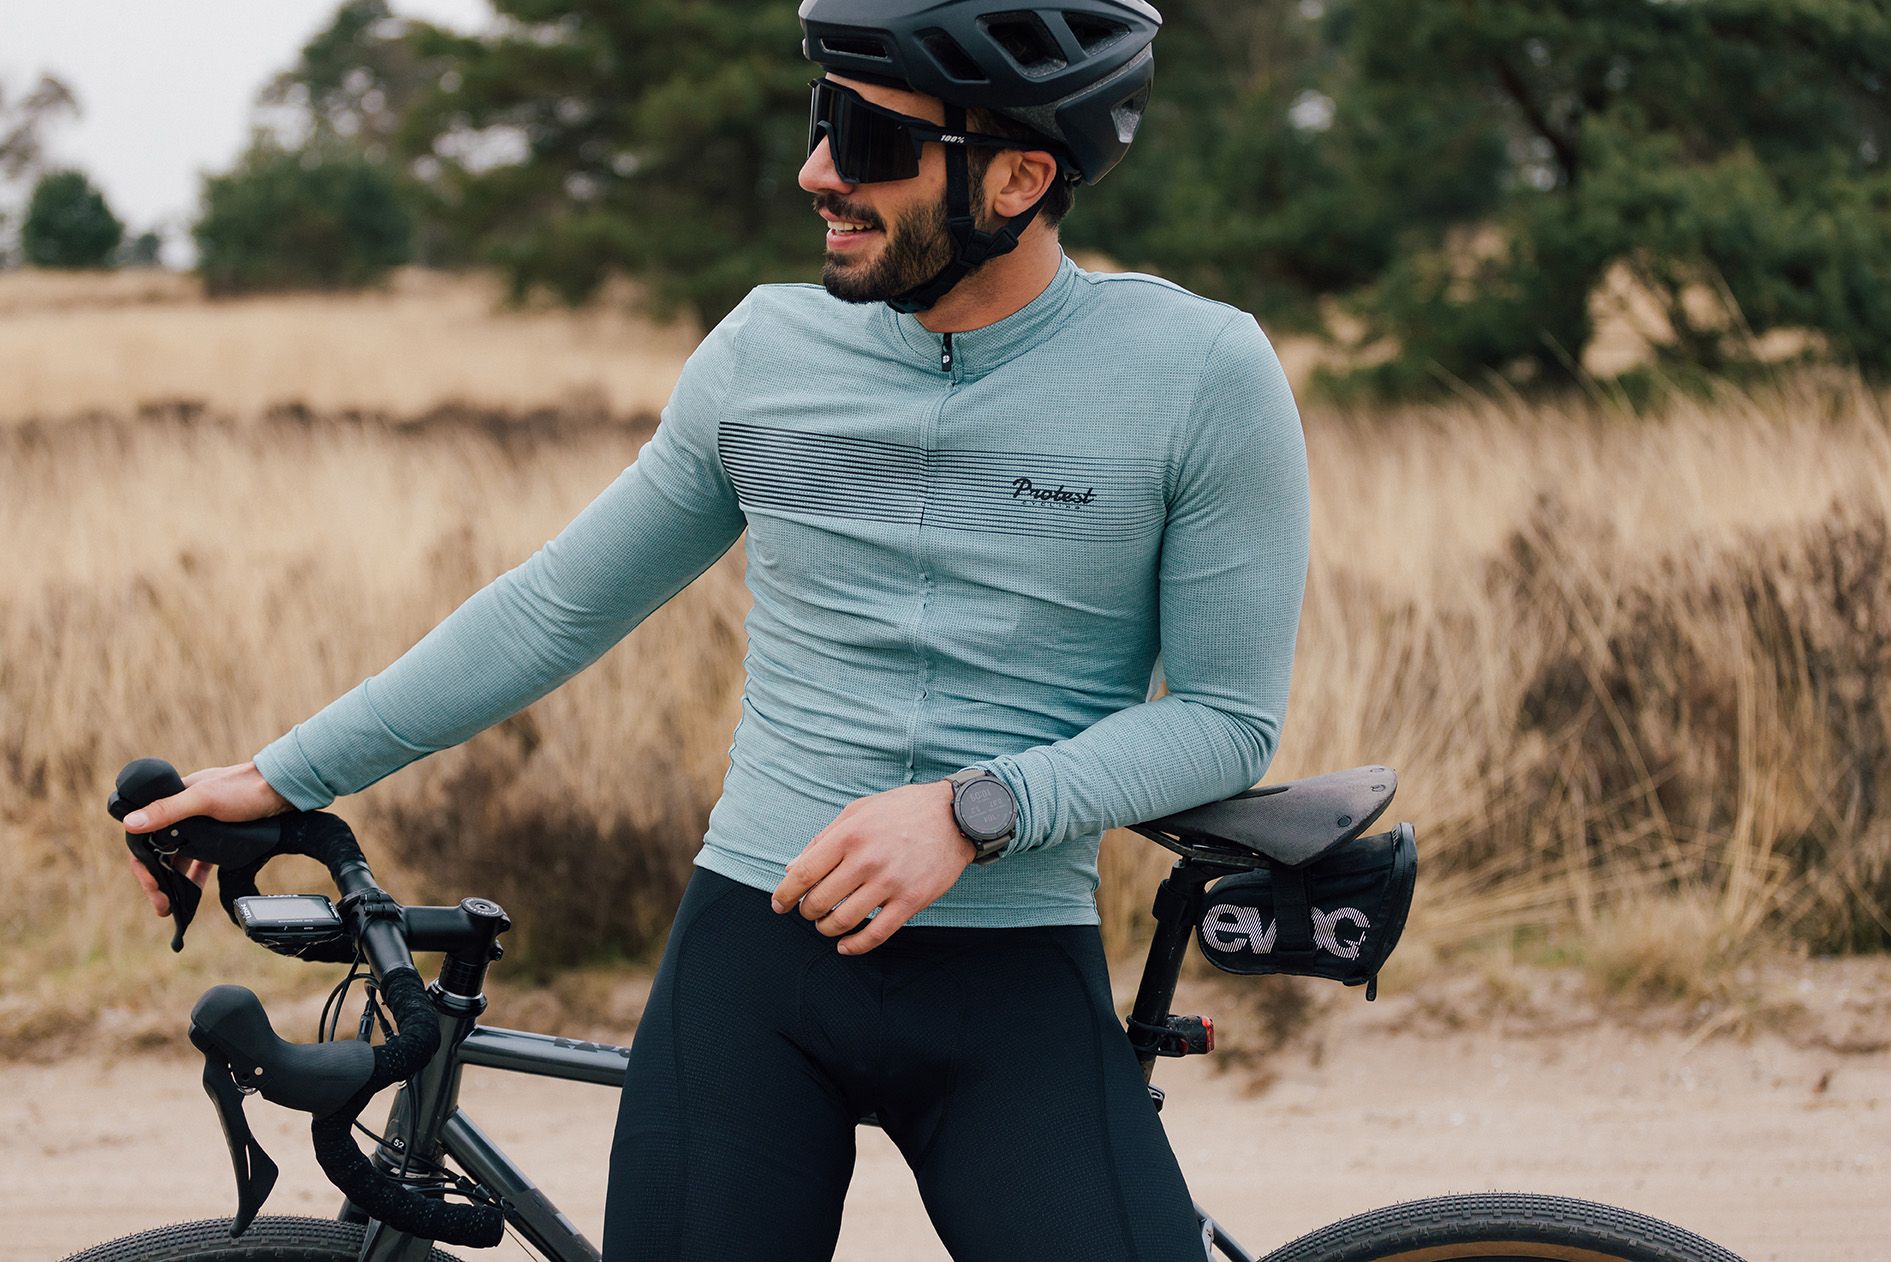 Protest sportswear launches their first cycling cloathing